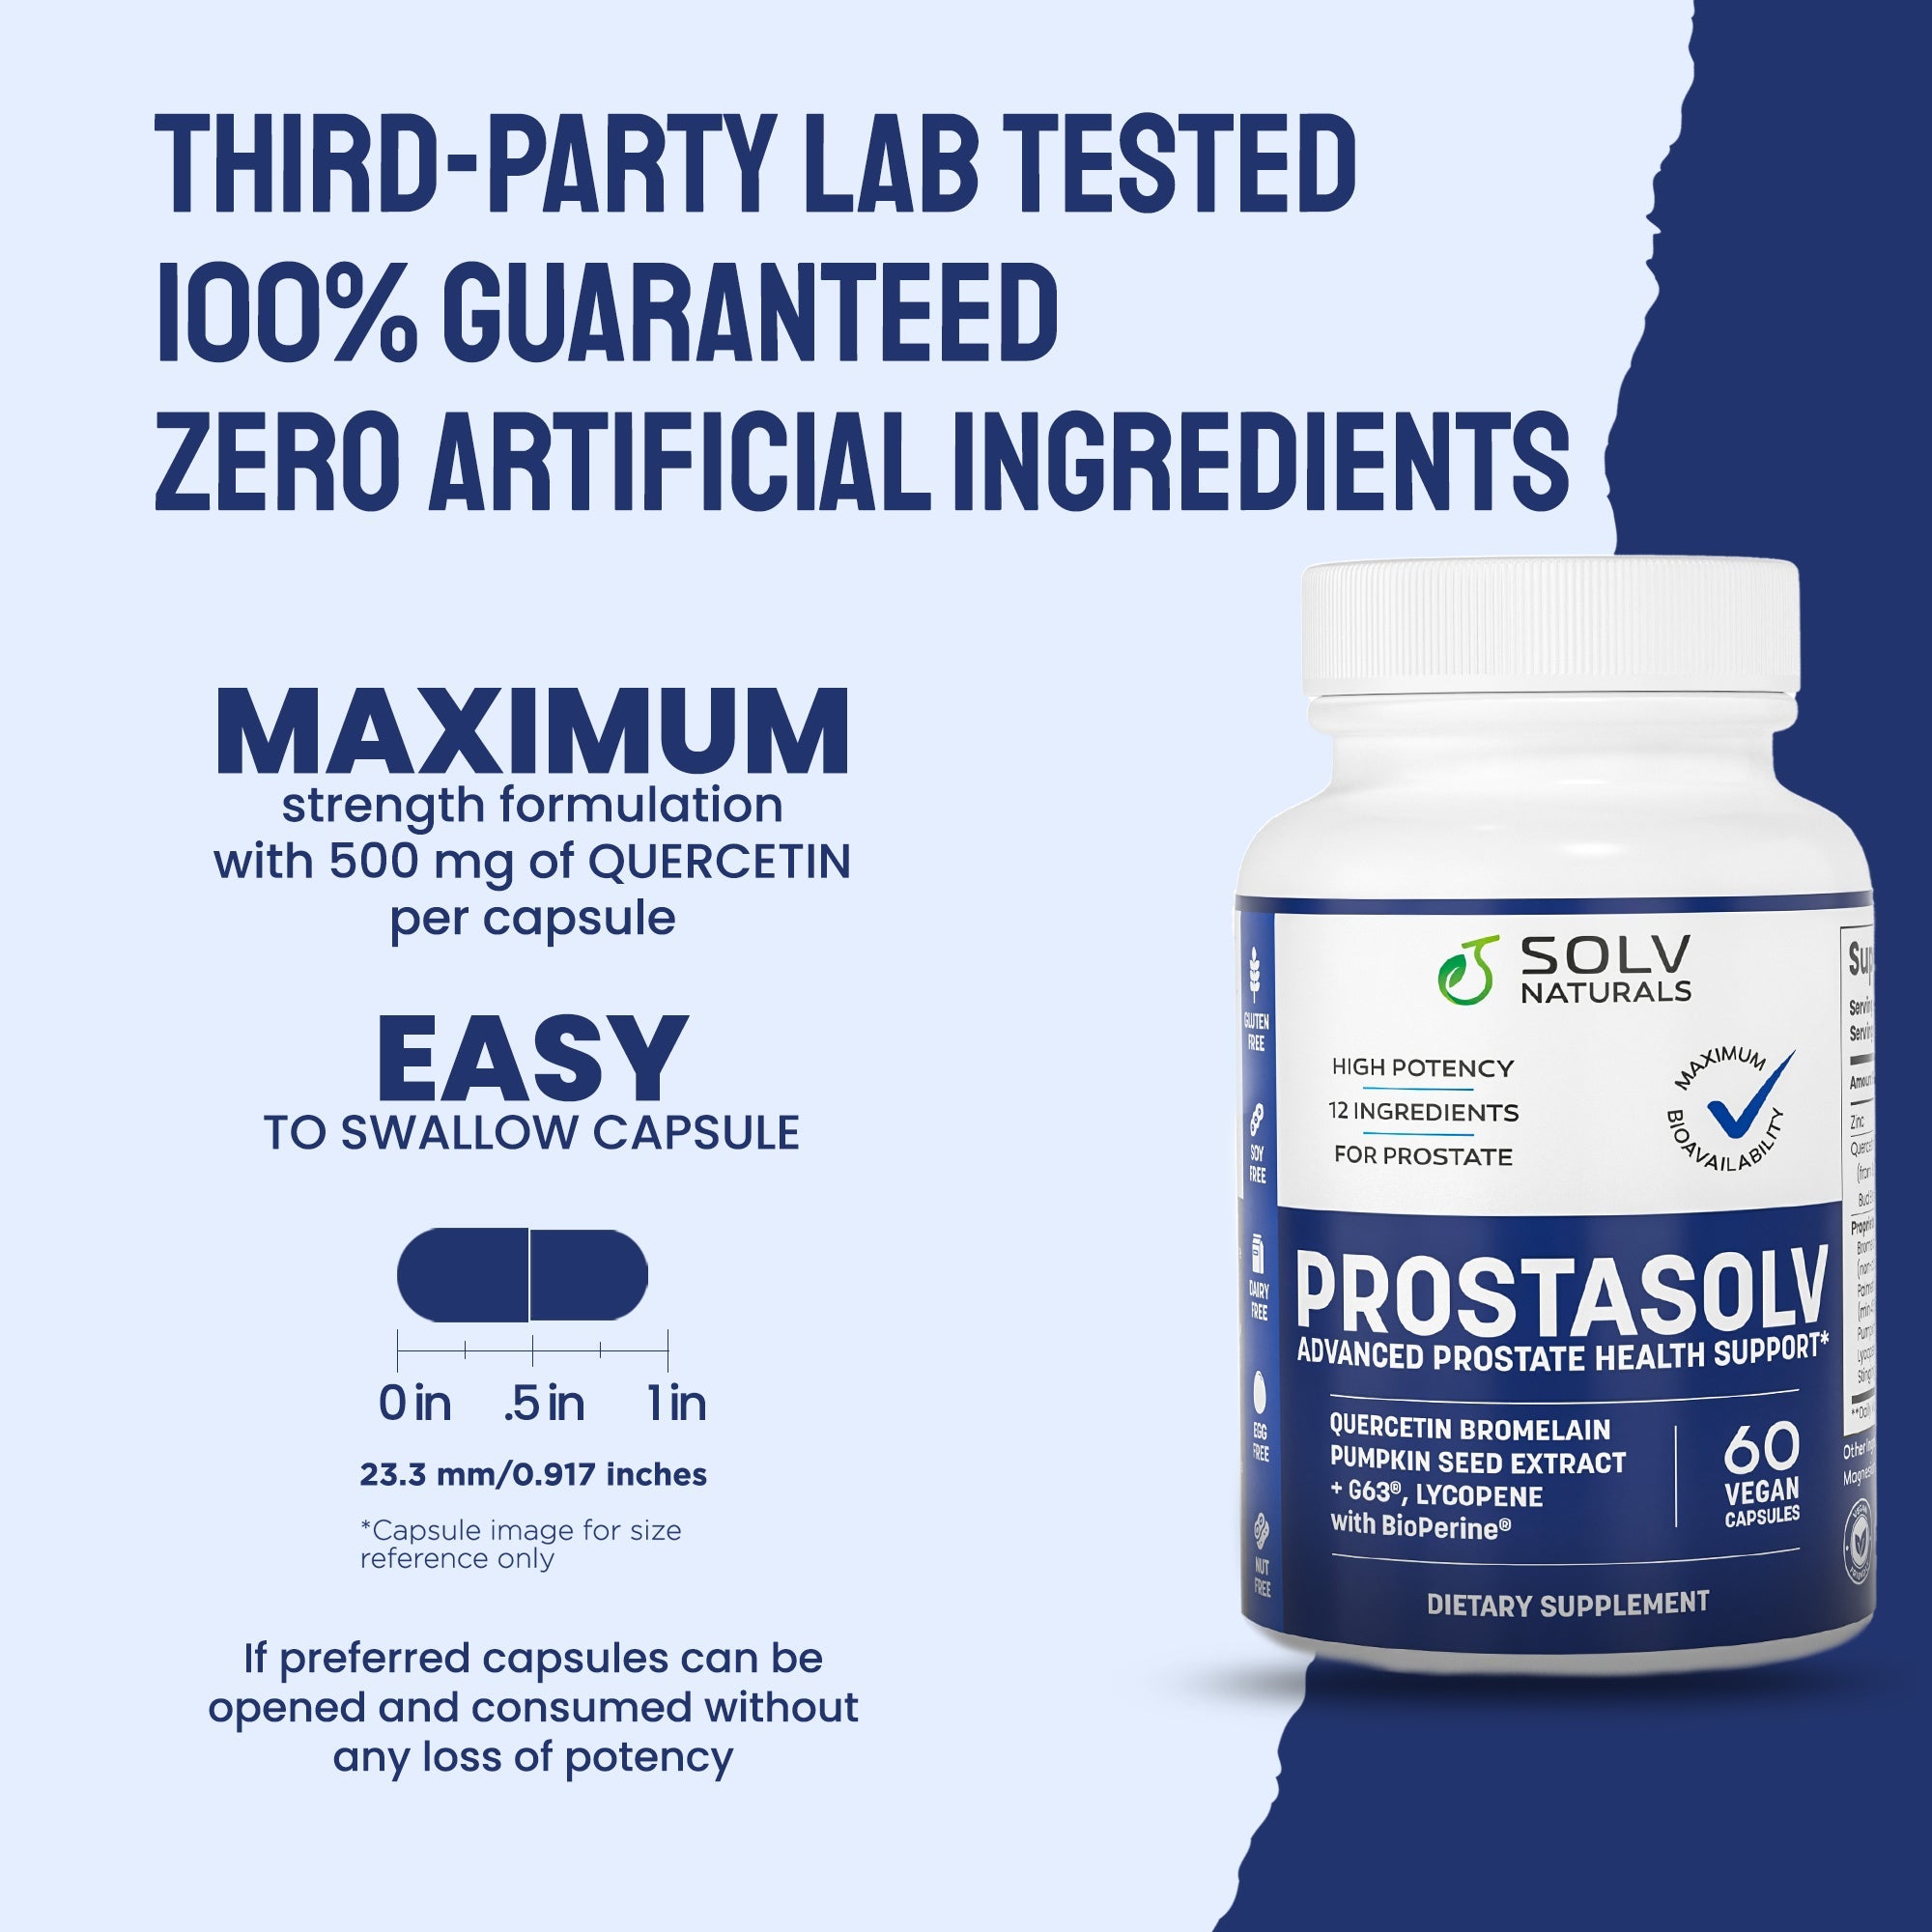 Third-party lab tested for purity, potency and shelf-life. Contains maximum strength 500 mgs of quercetin in easy-to-swallow capsule.  Capsules can be opened and consumed without any loss of potency